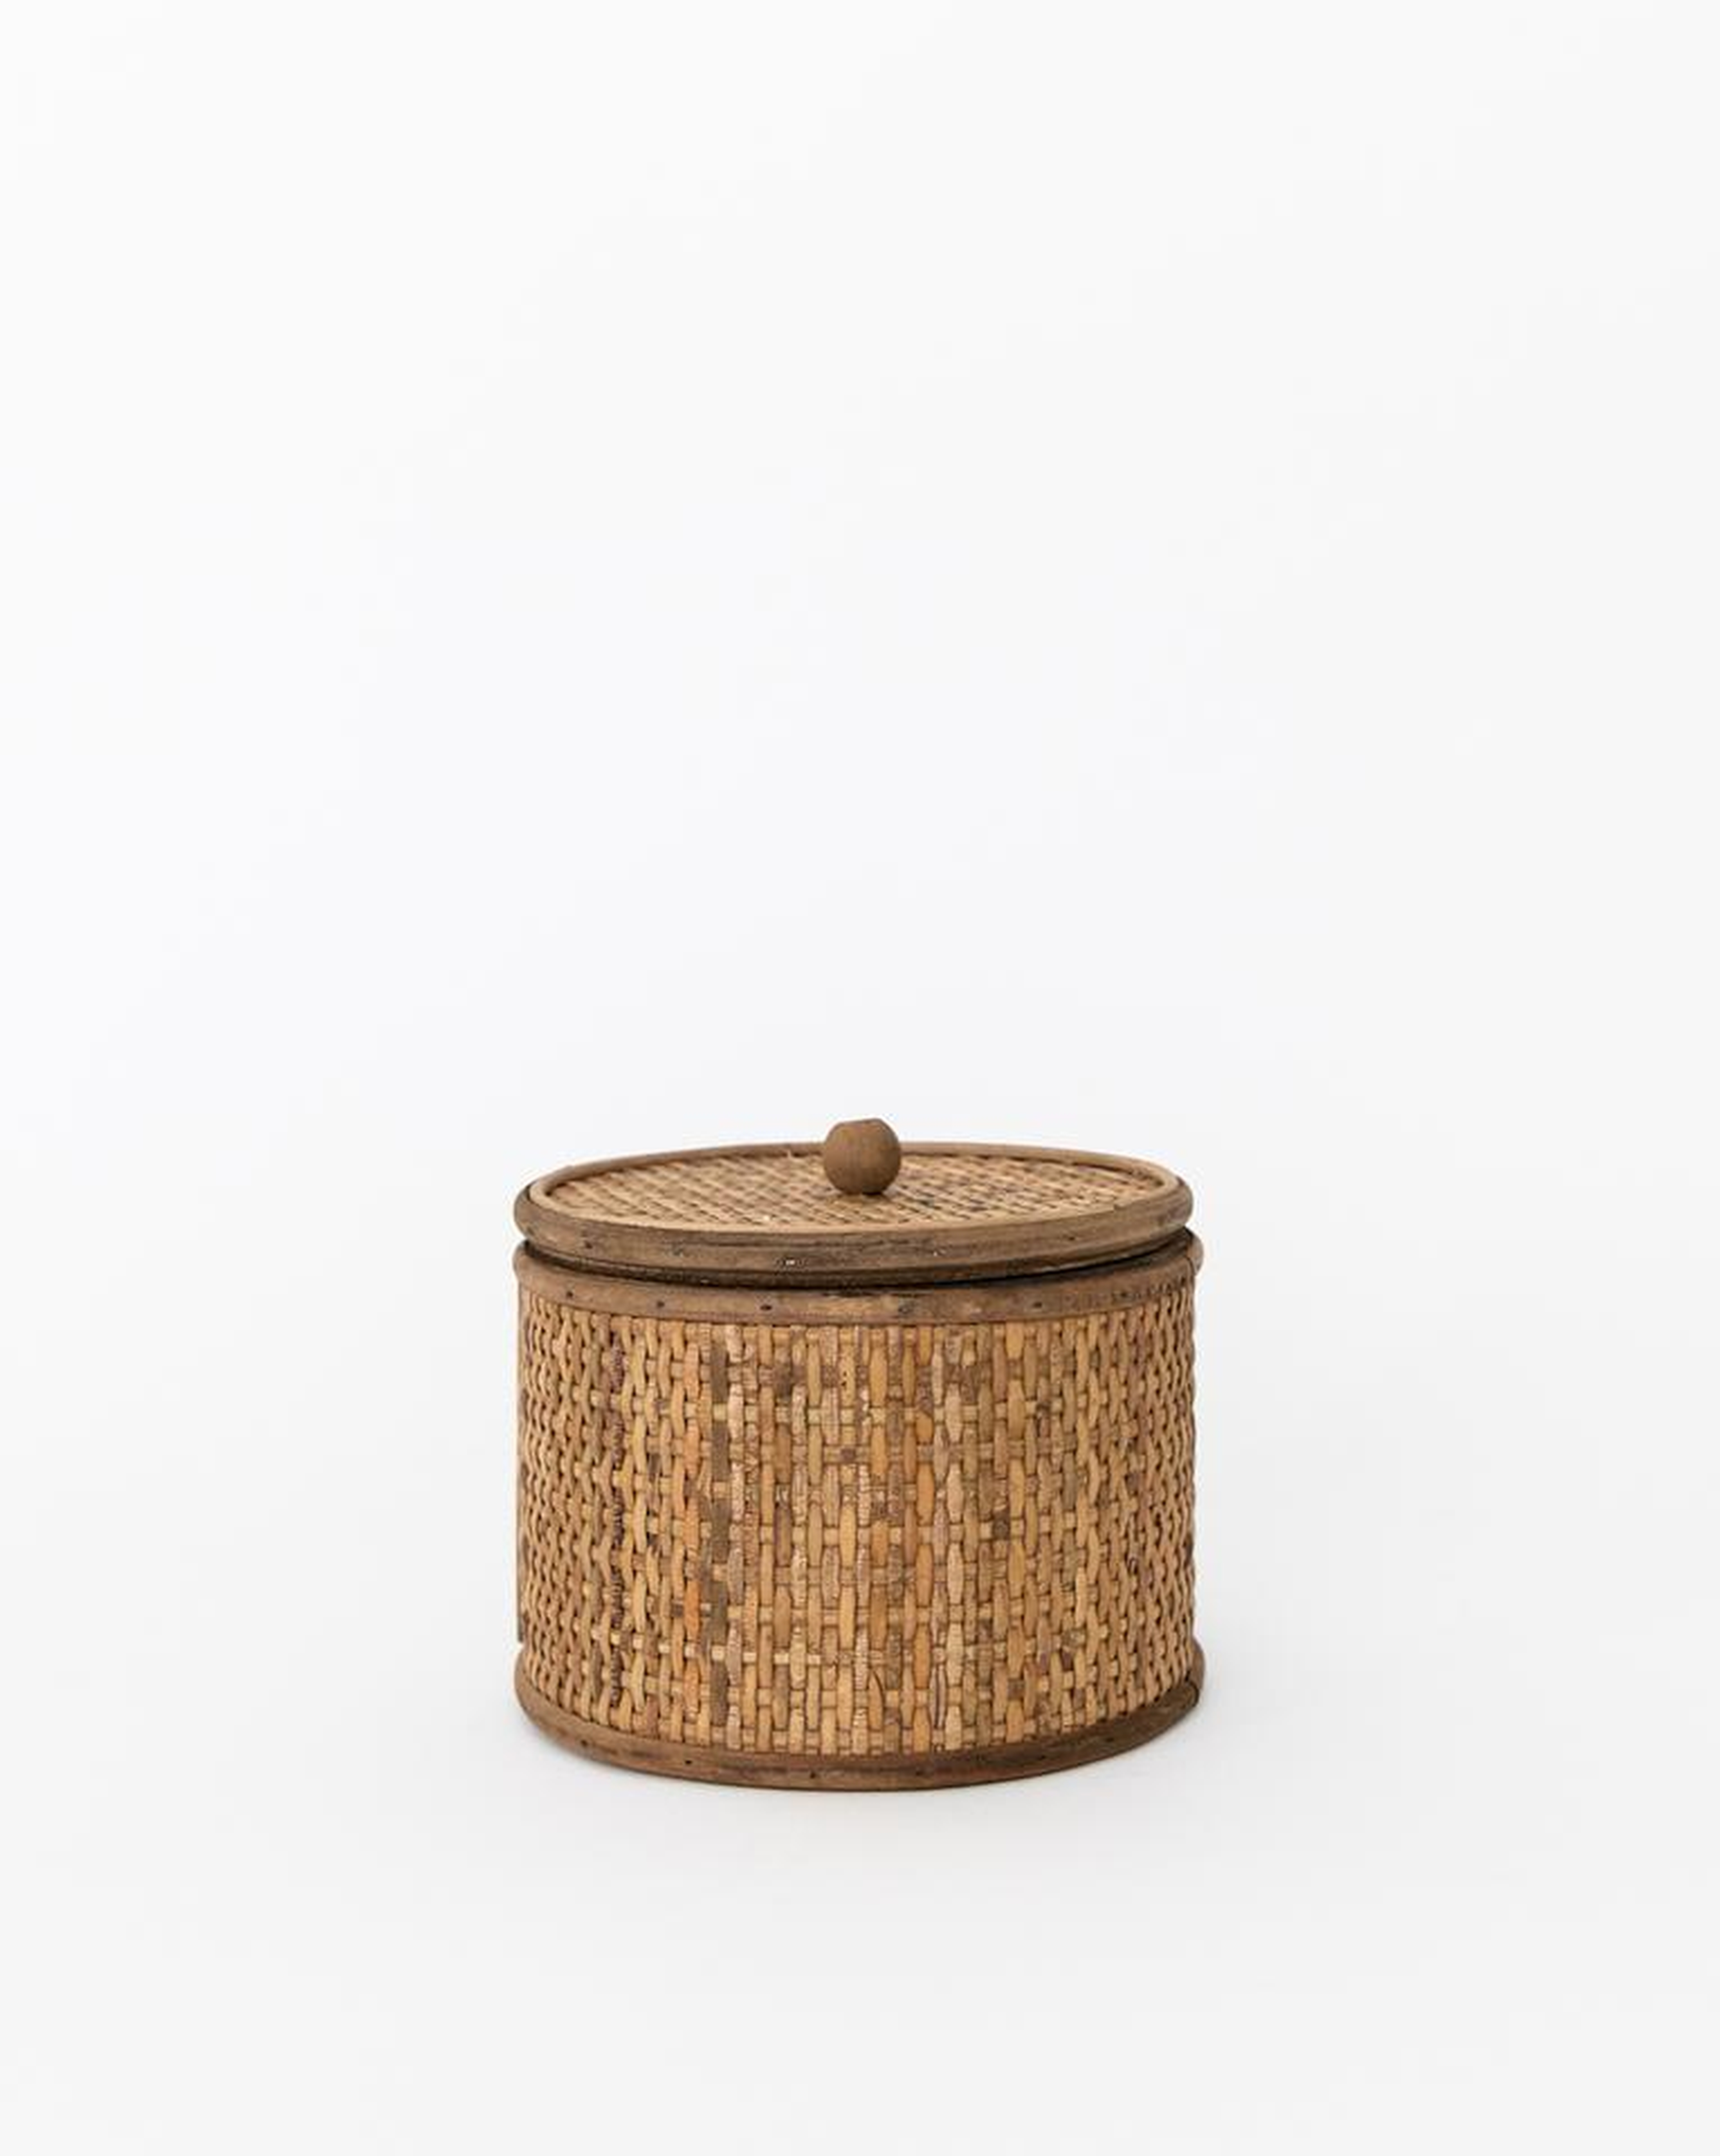 WOVEN CANE TUSCAN BOX, ROUND - McGee & Co.